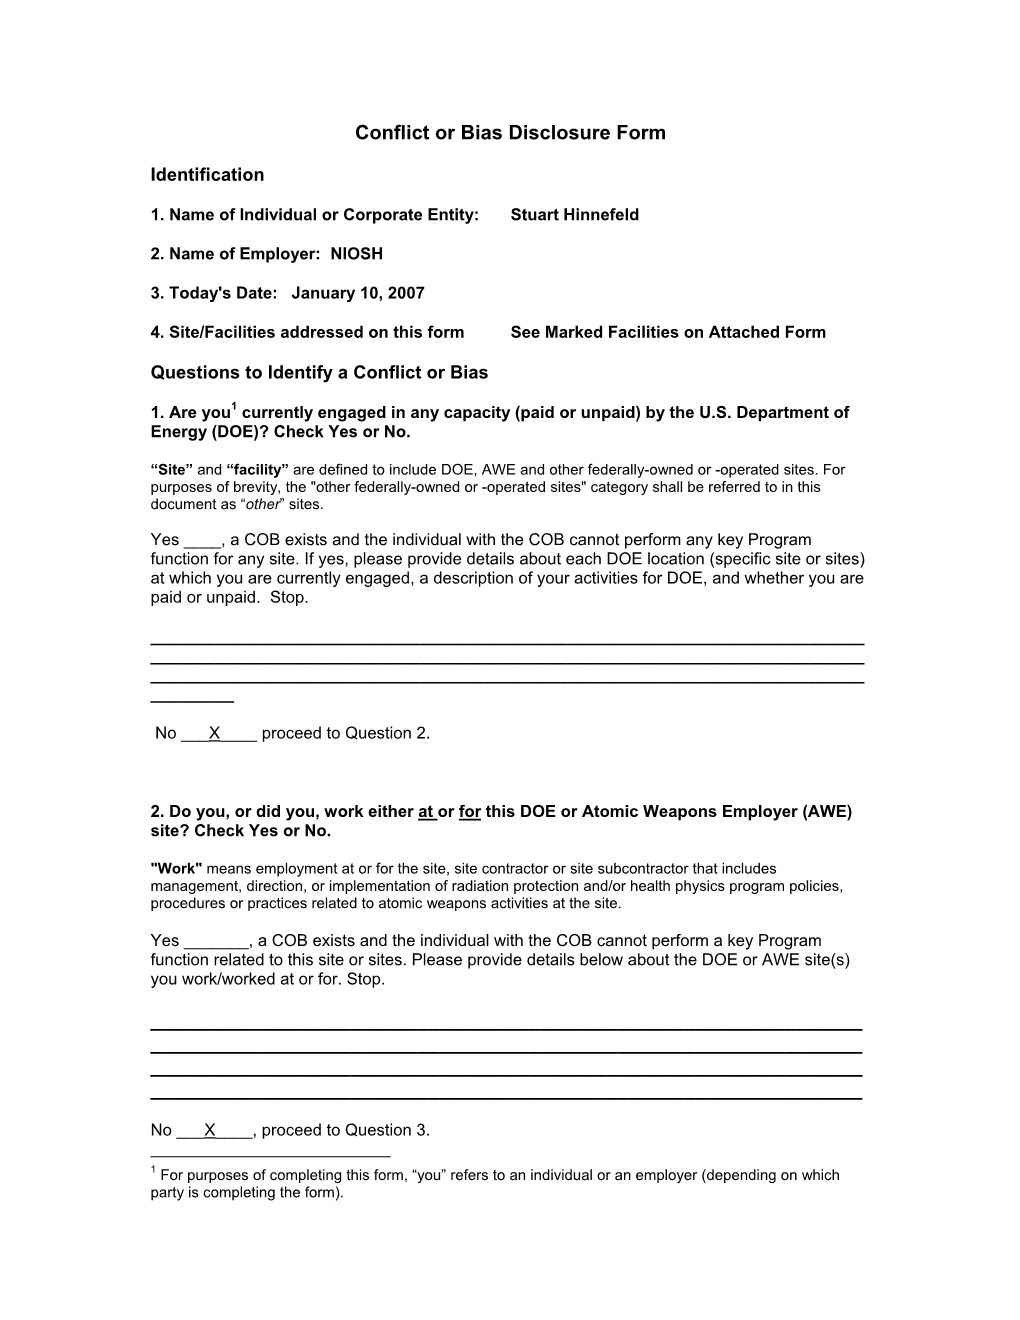 Non-Conflicted COB Disclosure Form Pdf Icon[406 KB (12 Pages)]